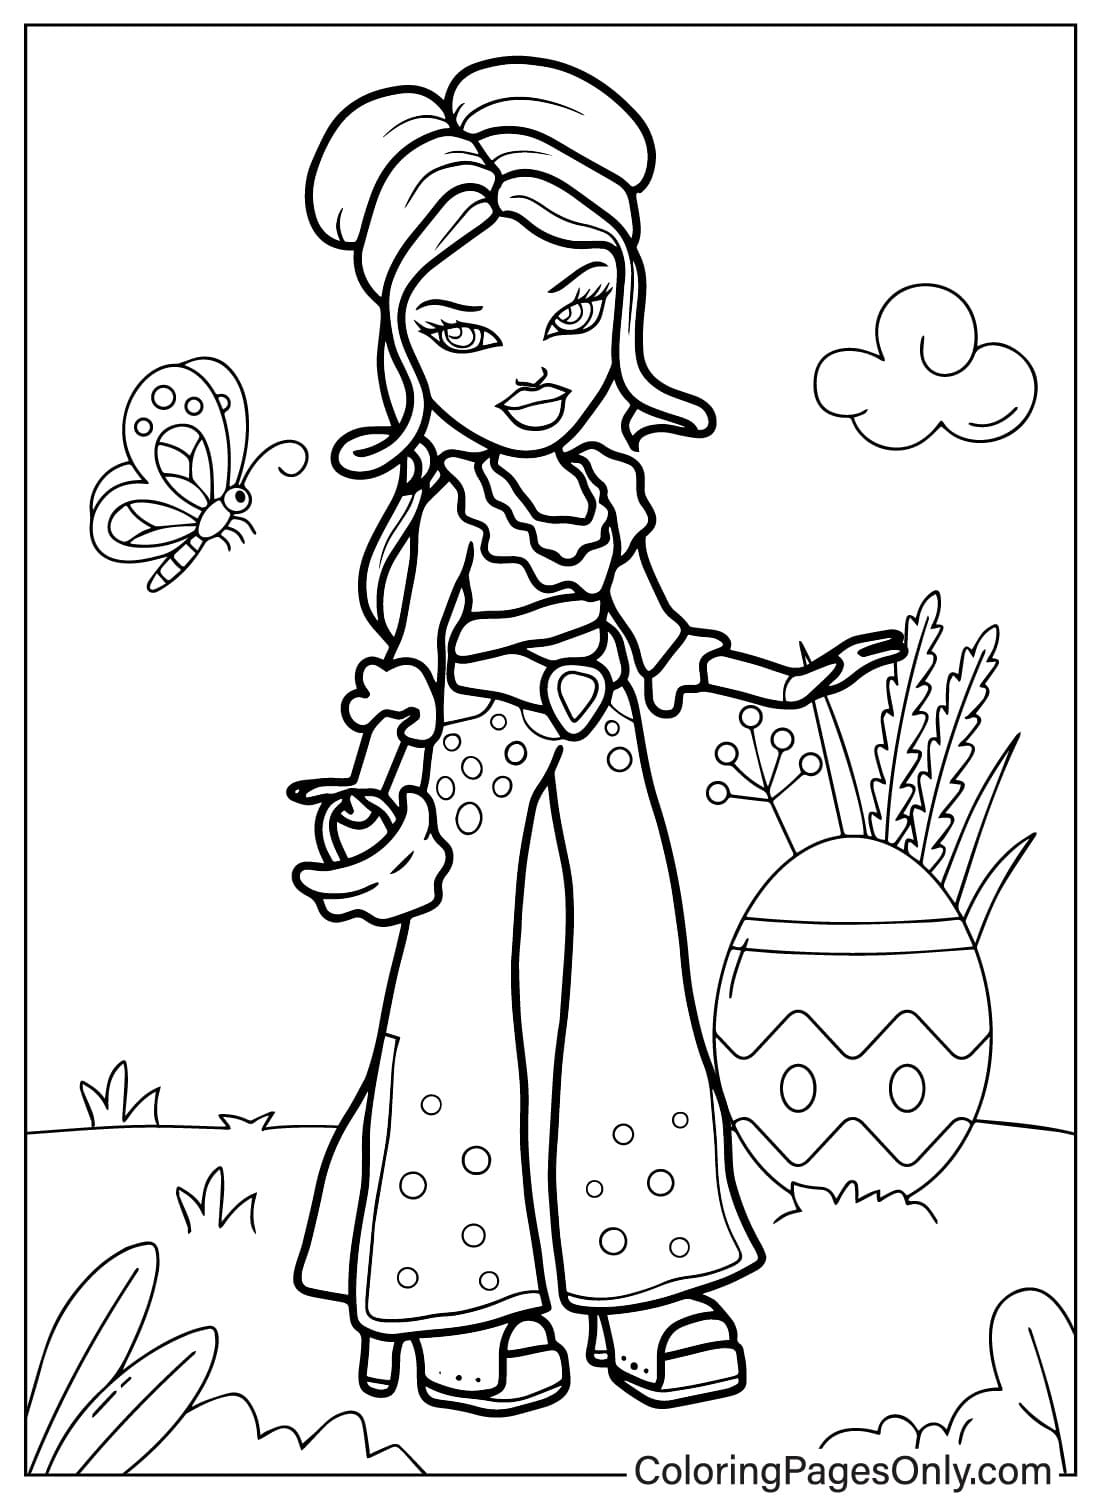 Bratz Coloring Page Pictures from Bratz